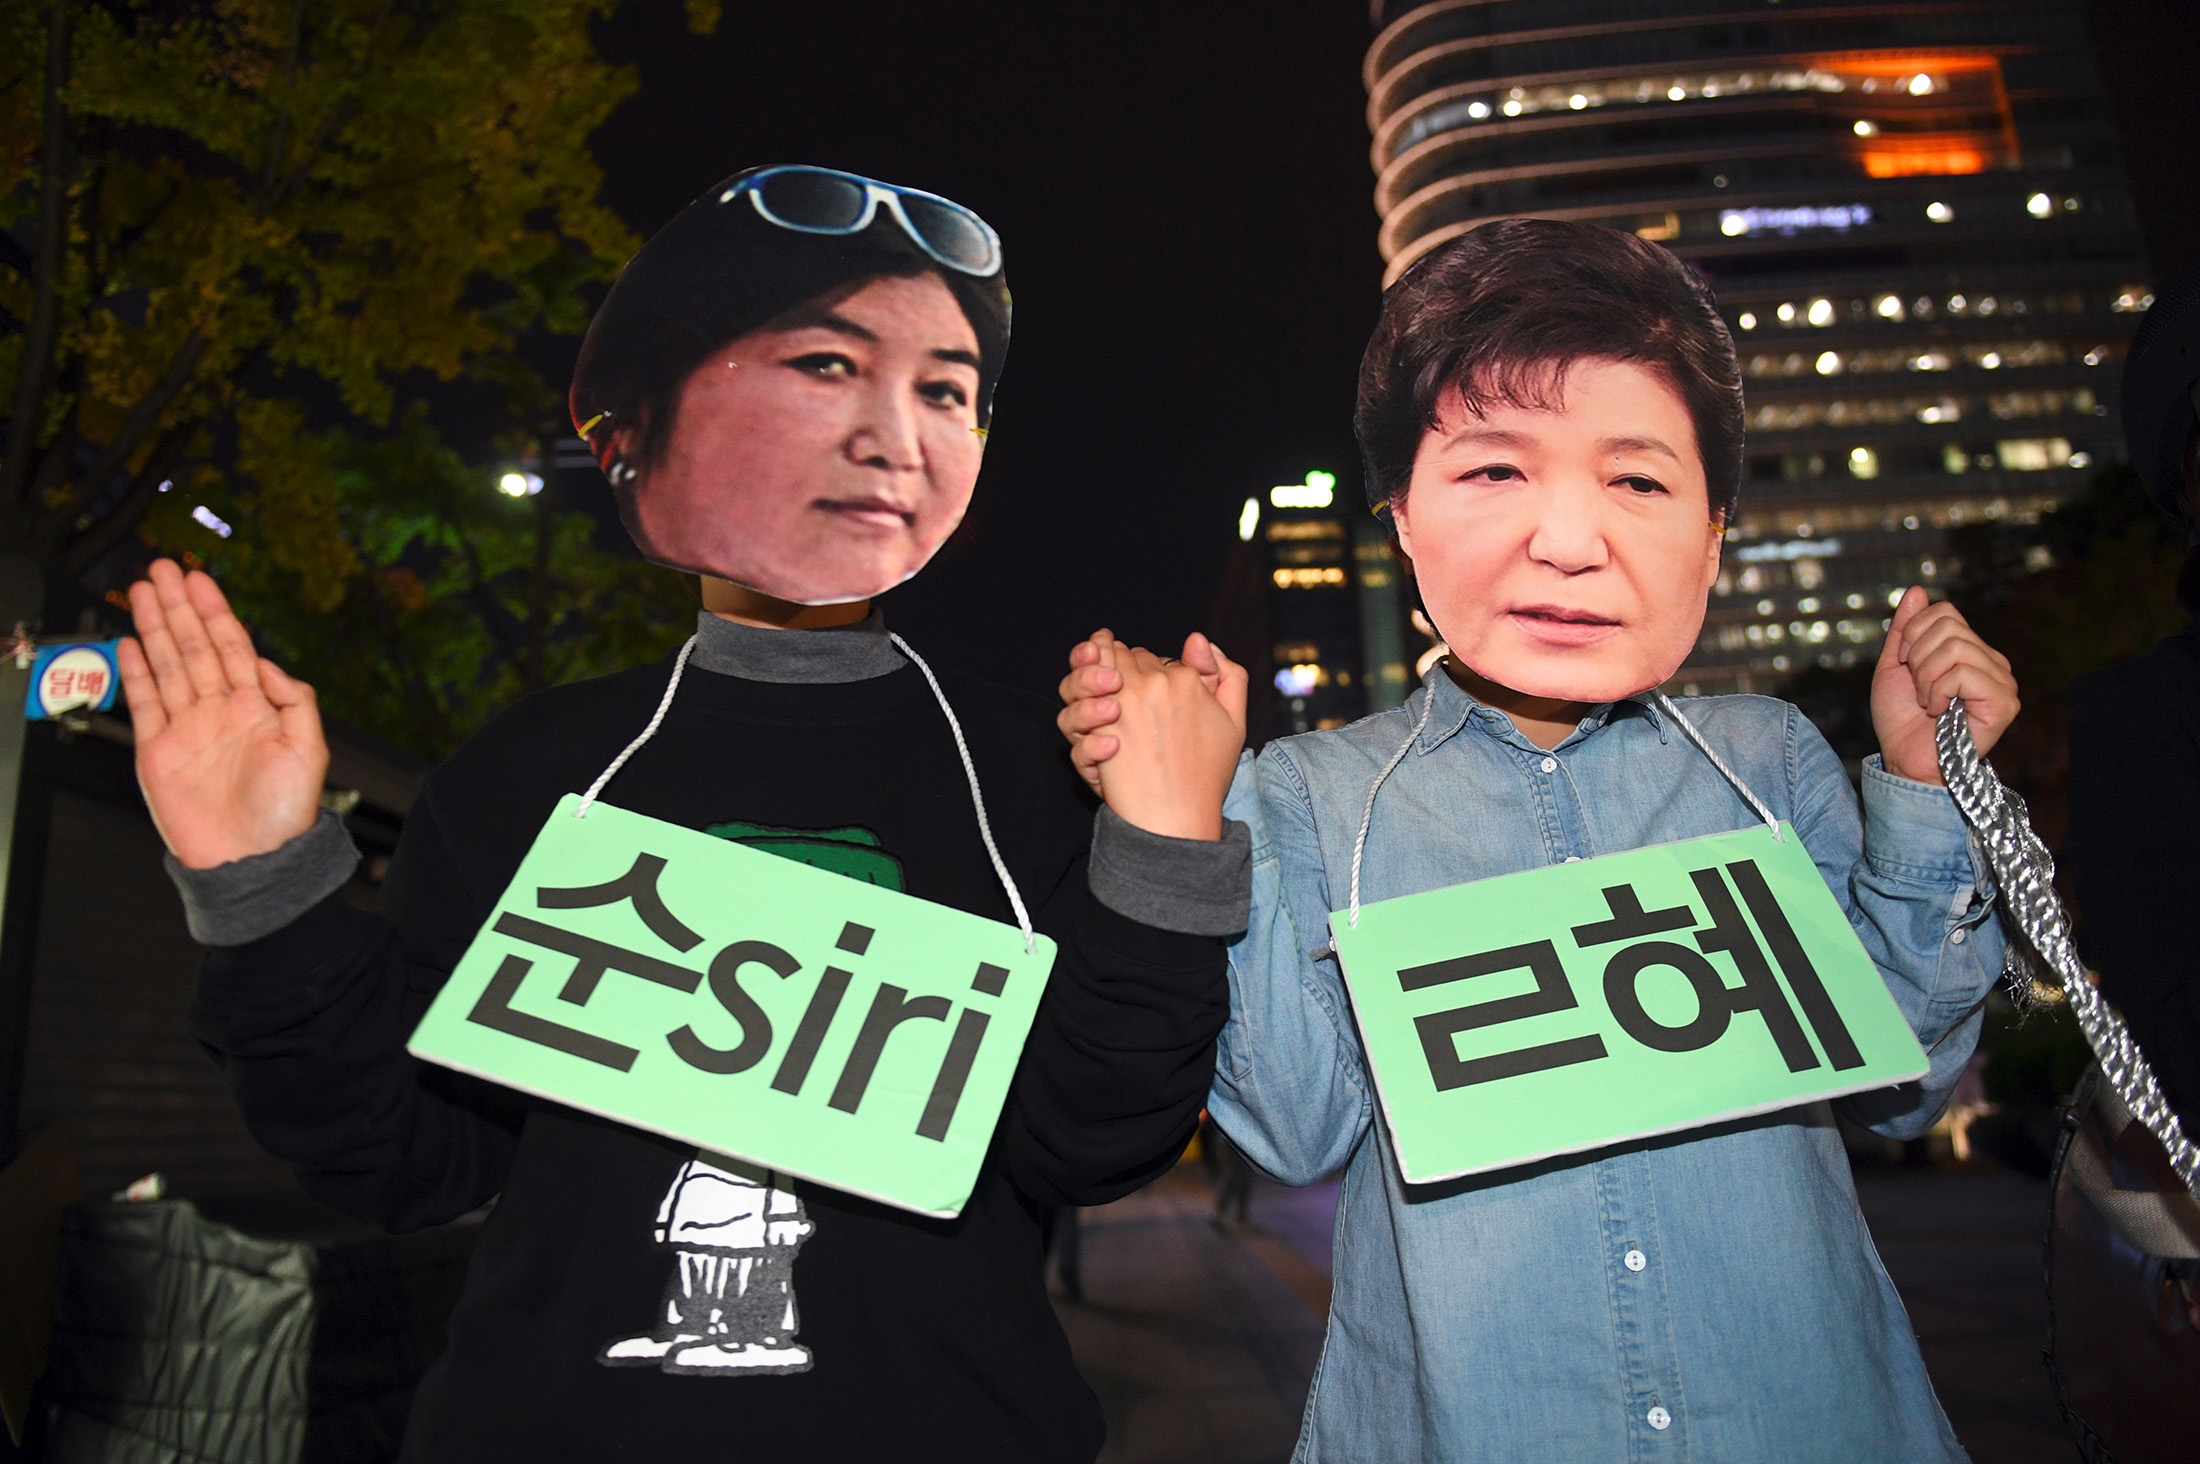 Protestors wearing masks of South Korean President Park Geun-Hye, right and Choi Soon-Sil pose for a performance in Seoul on Oct. 27. South Korean prosecutors on October 27 set up a high-powered 'task-force' to probe a widening scandal involving alleged influence-peddling by a close confidante of President Park Geun-Hye. Choi Soon-Sil, an enigmatic woman with no government position, was already part of an investigation into allegations that she used her relationship with the president to strong-arm conglomerates into multi-million dollar donations to two non-profit foundations. / AFP / JUNG YEON-JE (Photo credit should read JUNG YEON-JE/AFP/Getty Images)
